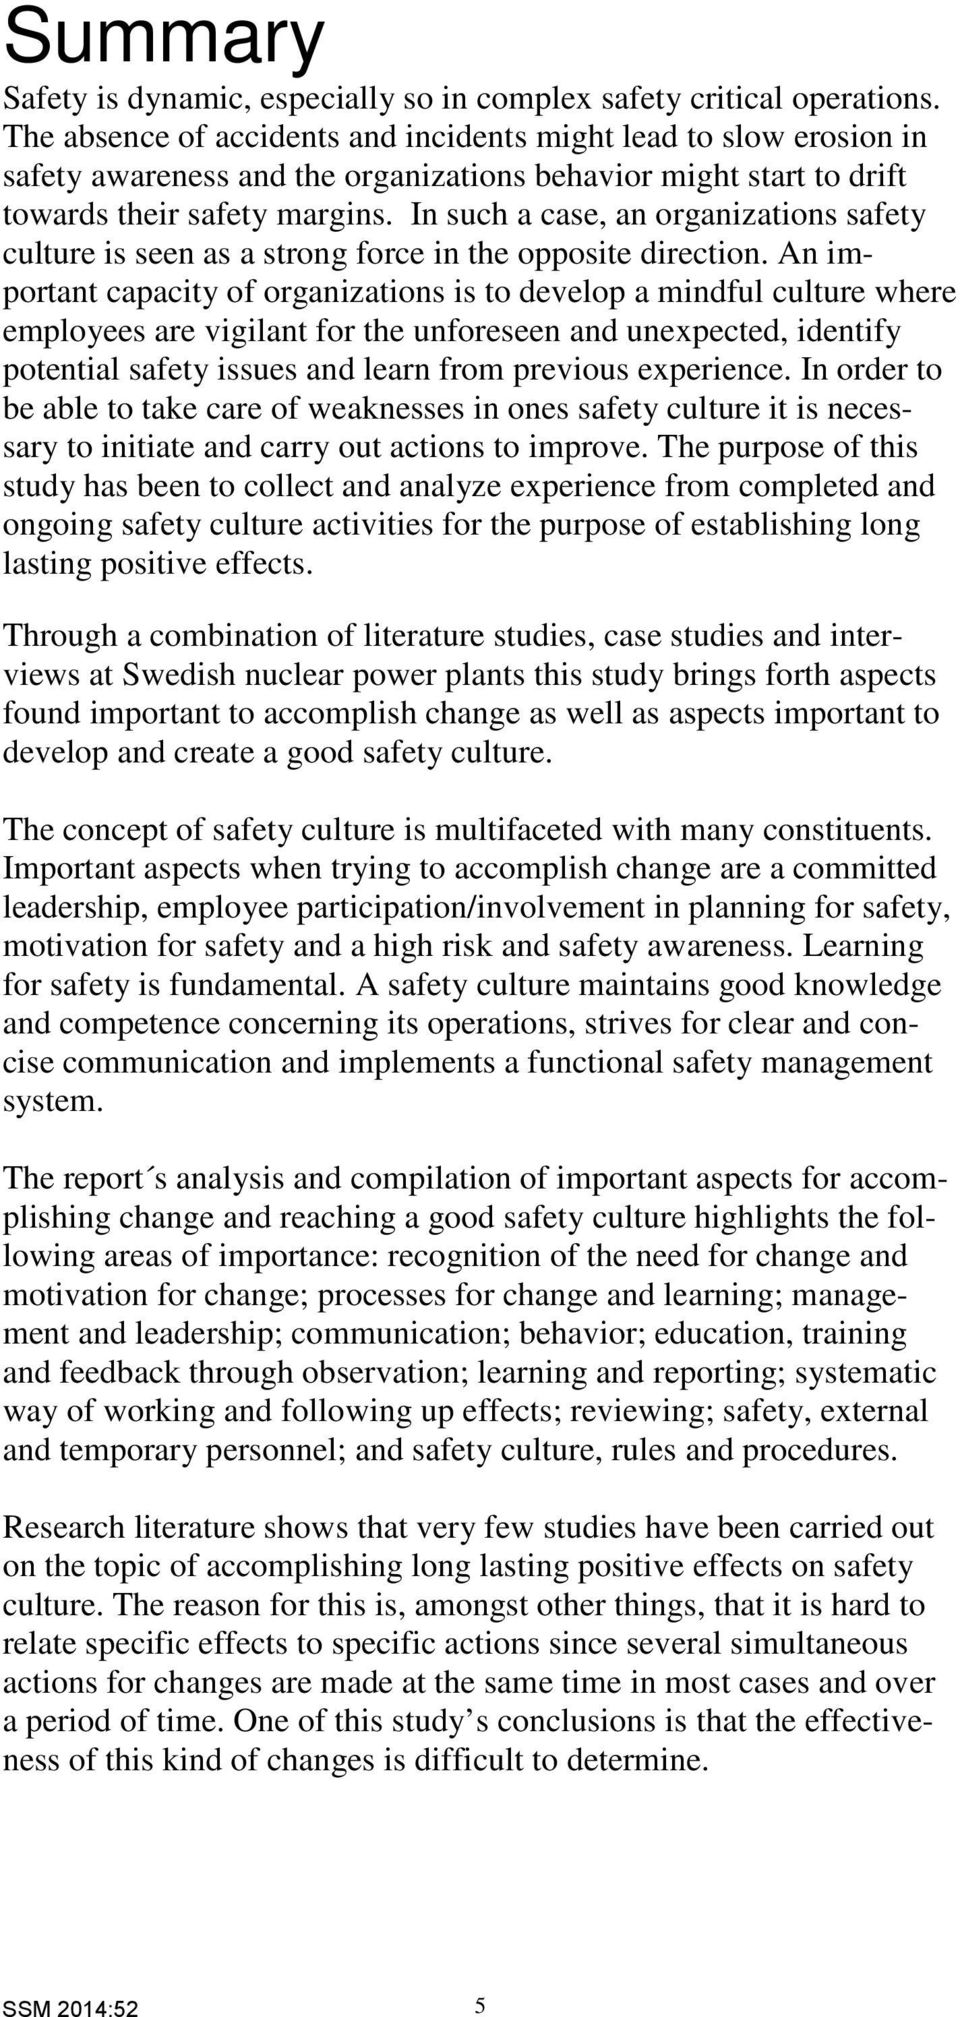 In such a case, an organizations safety culture is seen as a strong force in the opposite direction.